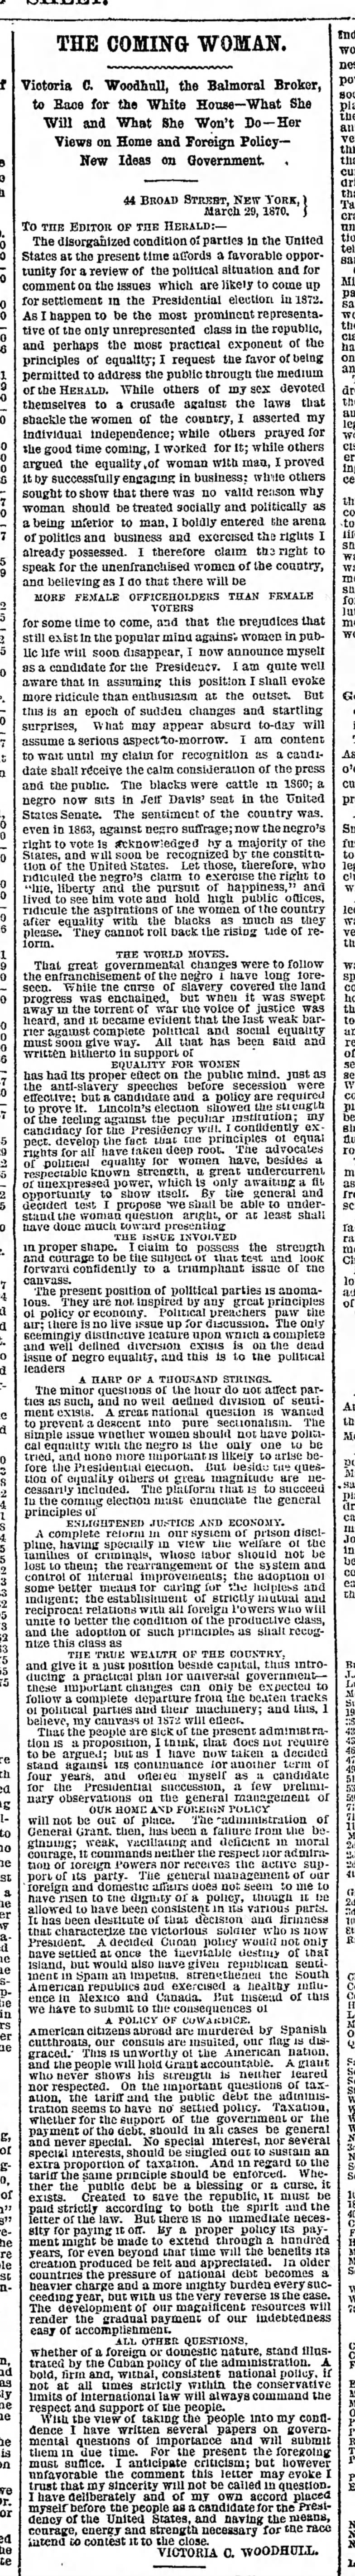 Victoria Woodhull announces her candidacy on Apr. 2, 1870 in the New York Herald